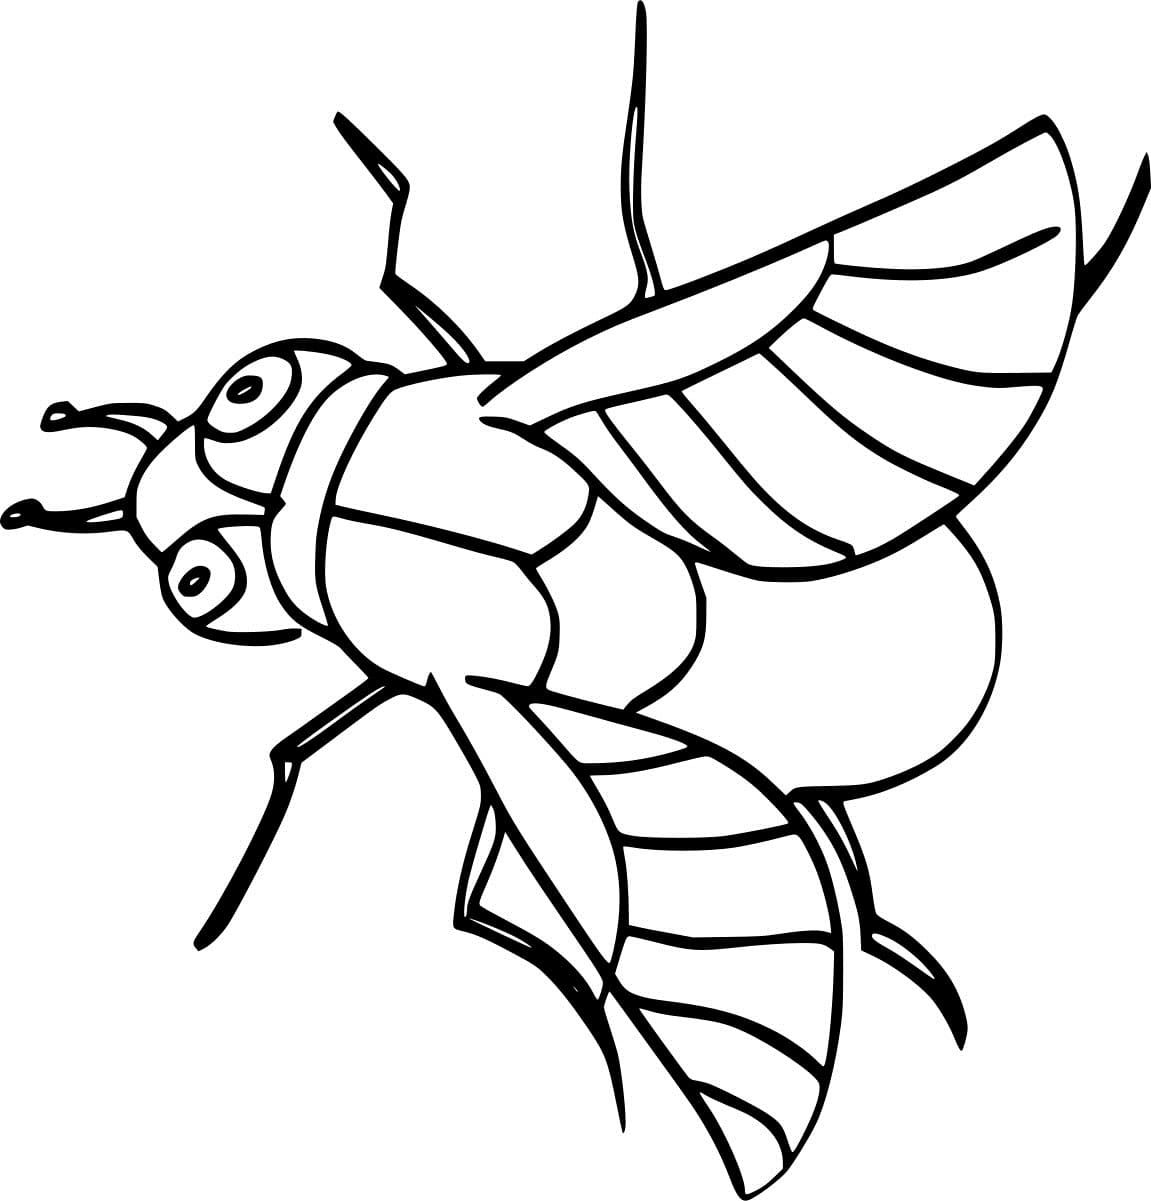 Easy Simple Fly Image Coloring Page